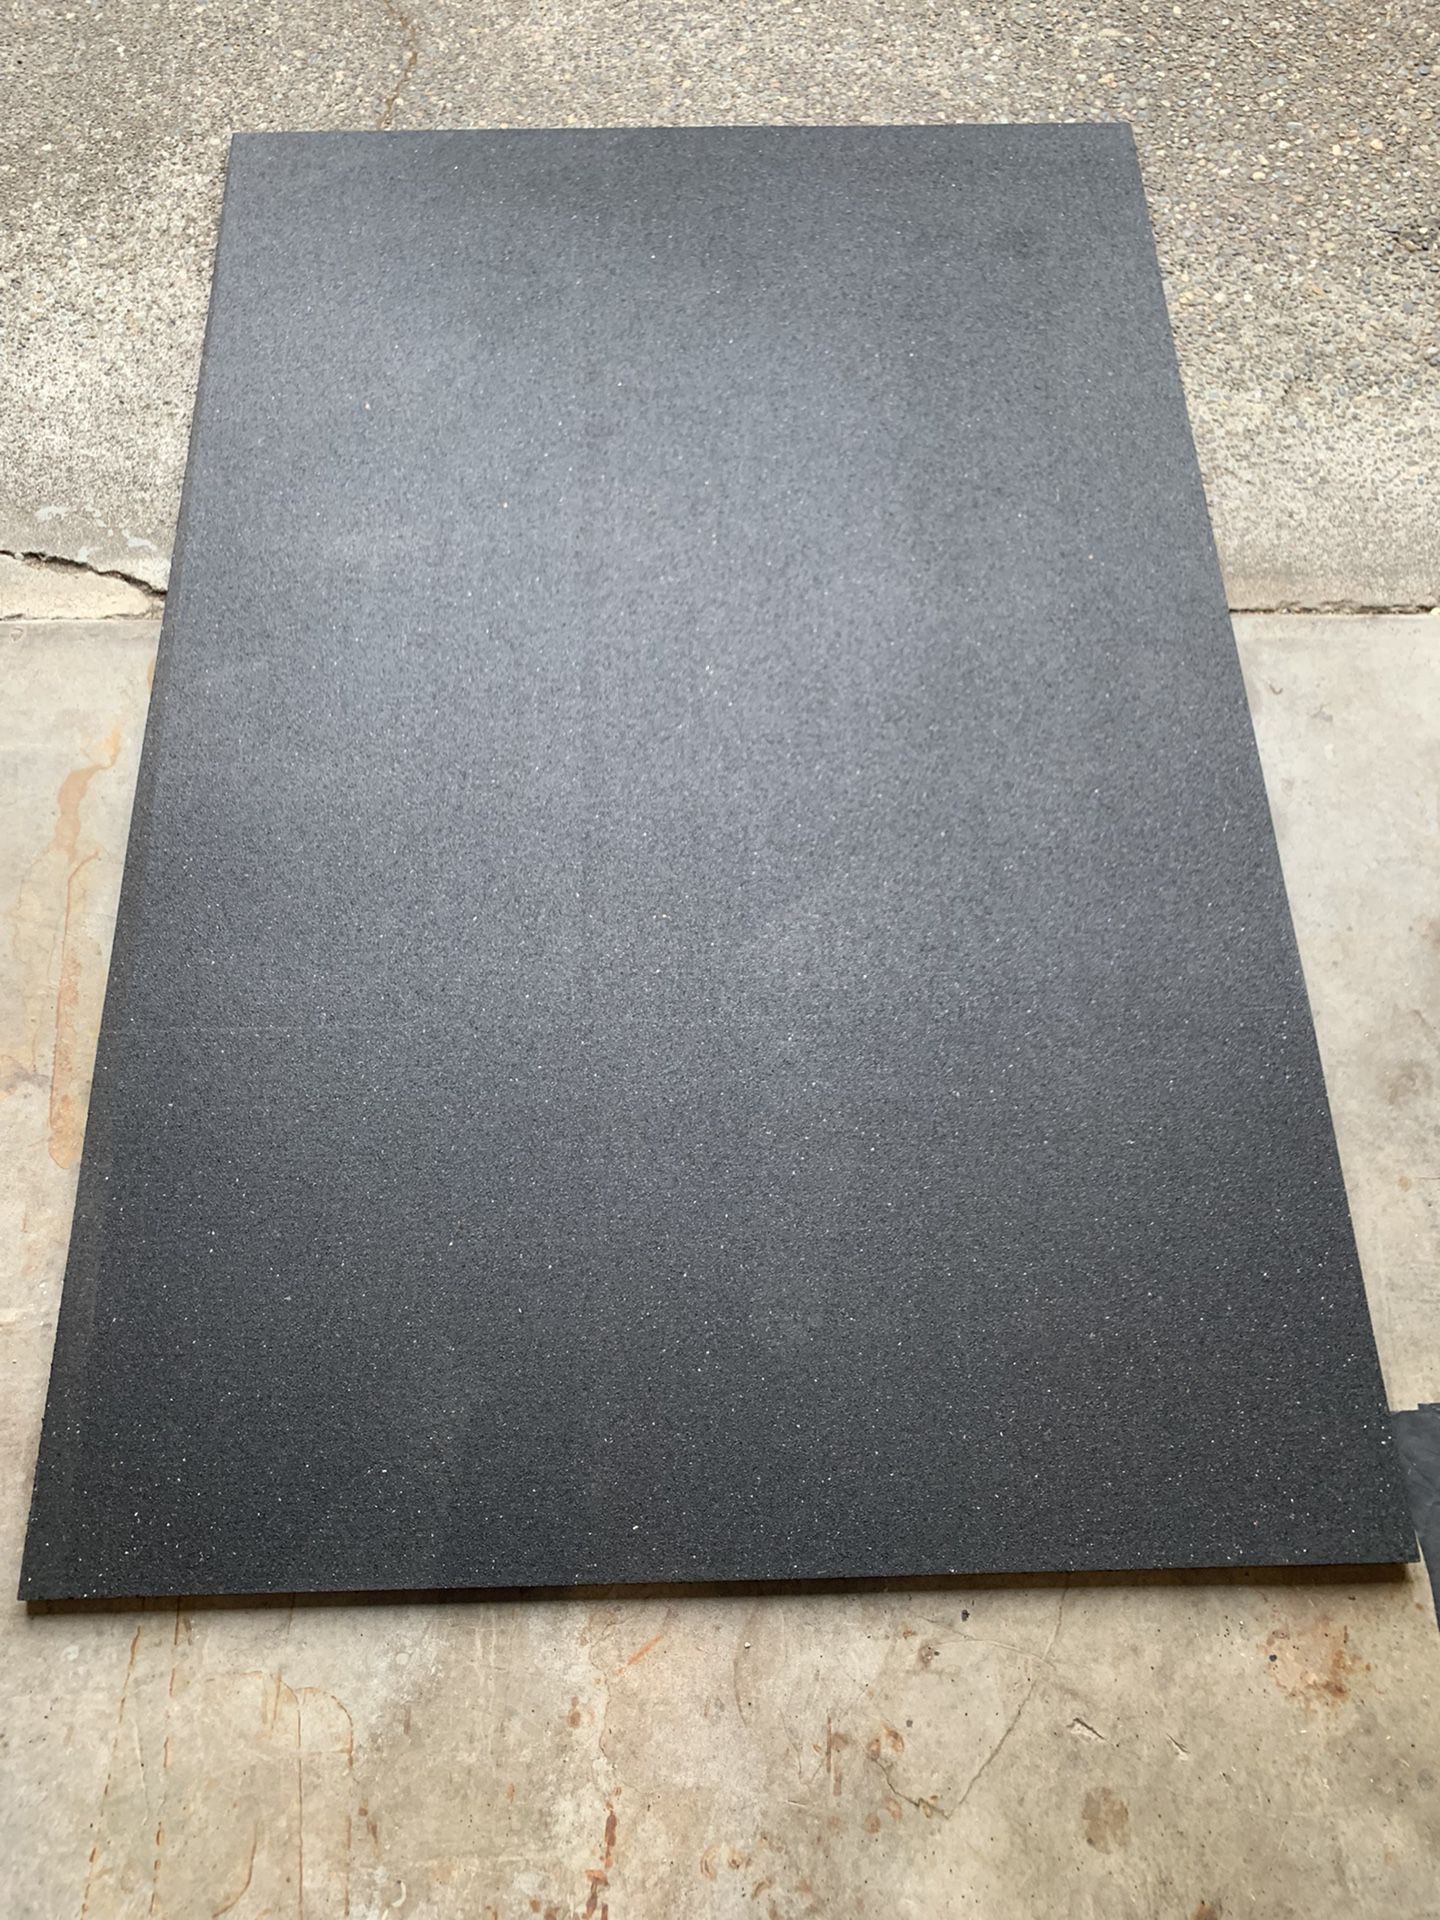 Exercise / Gym / Weight Mat - 4’x6’, 3/4” Thick - Brand New